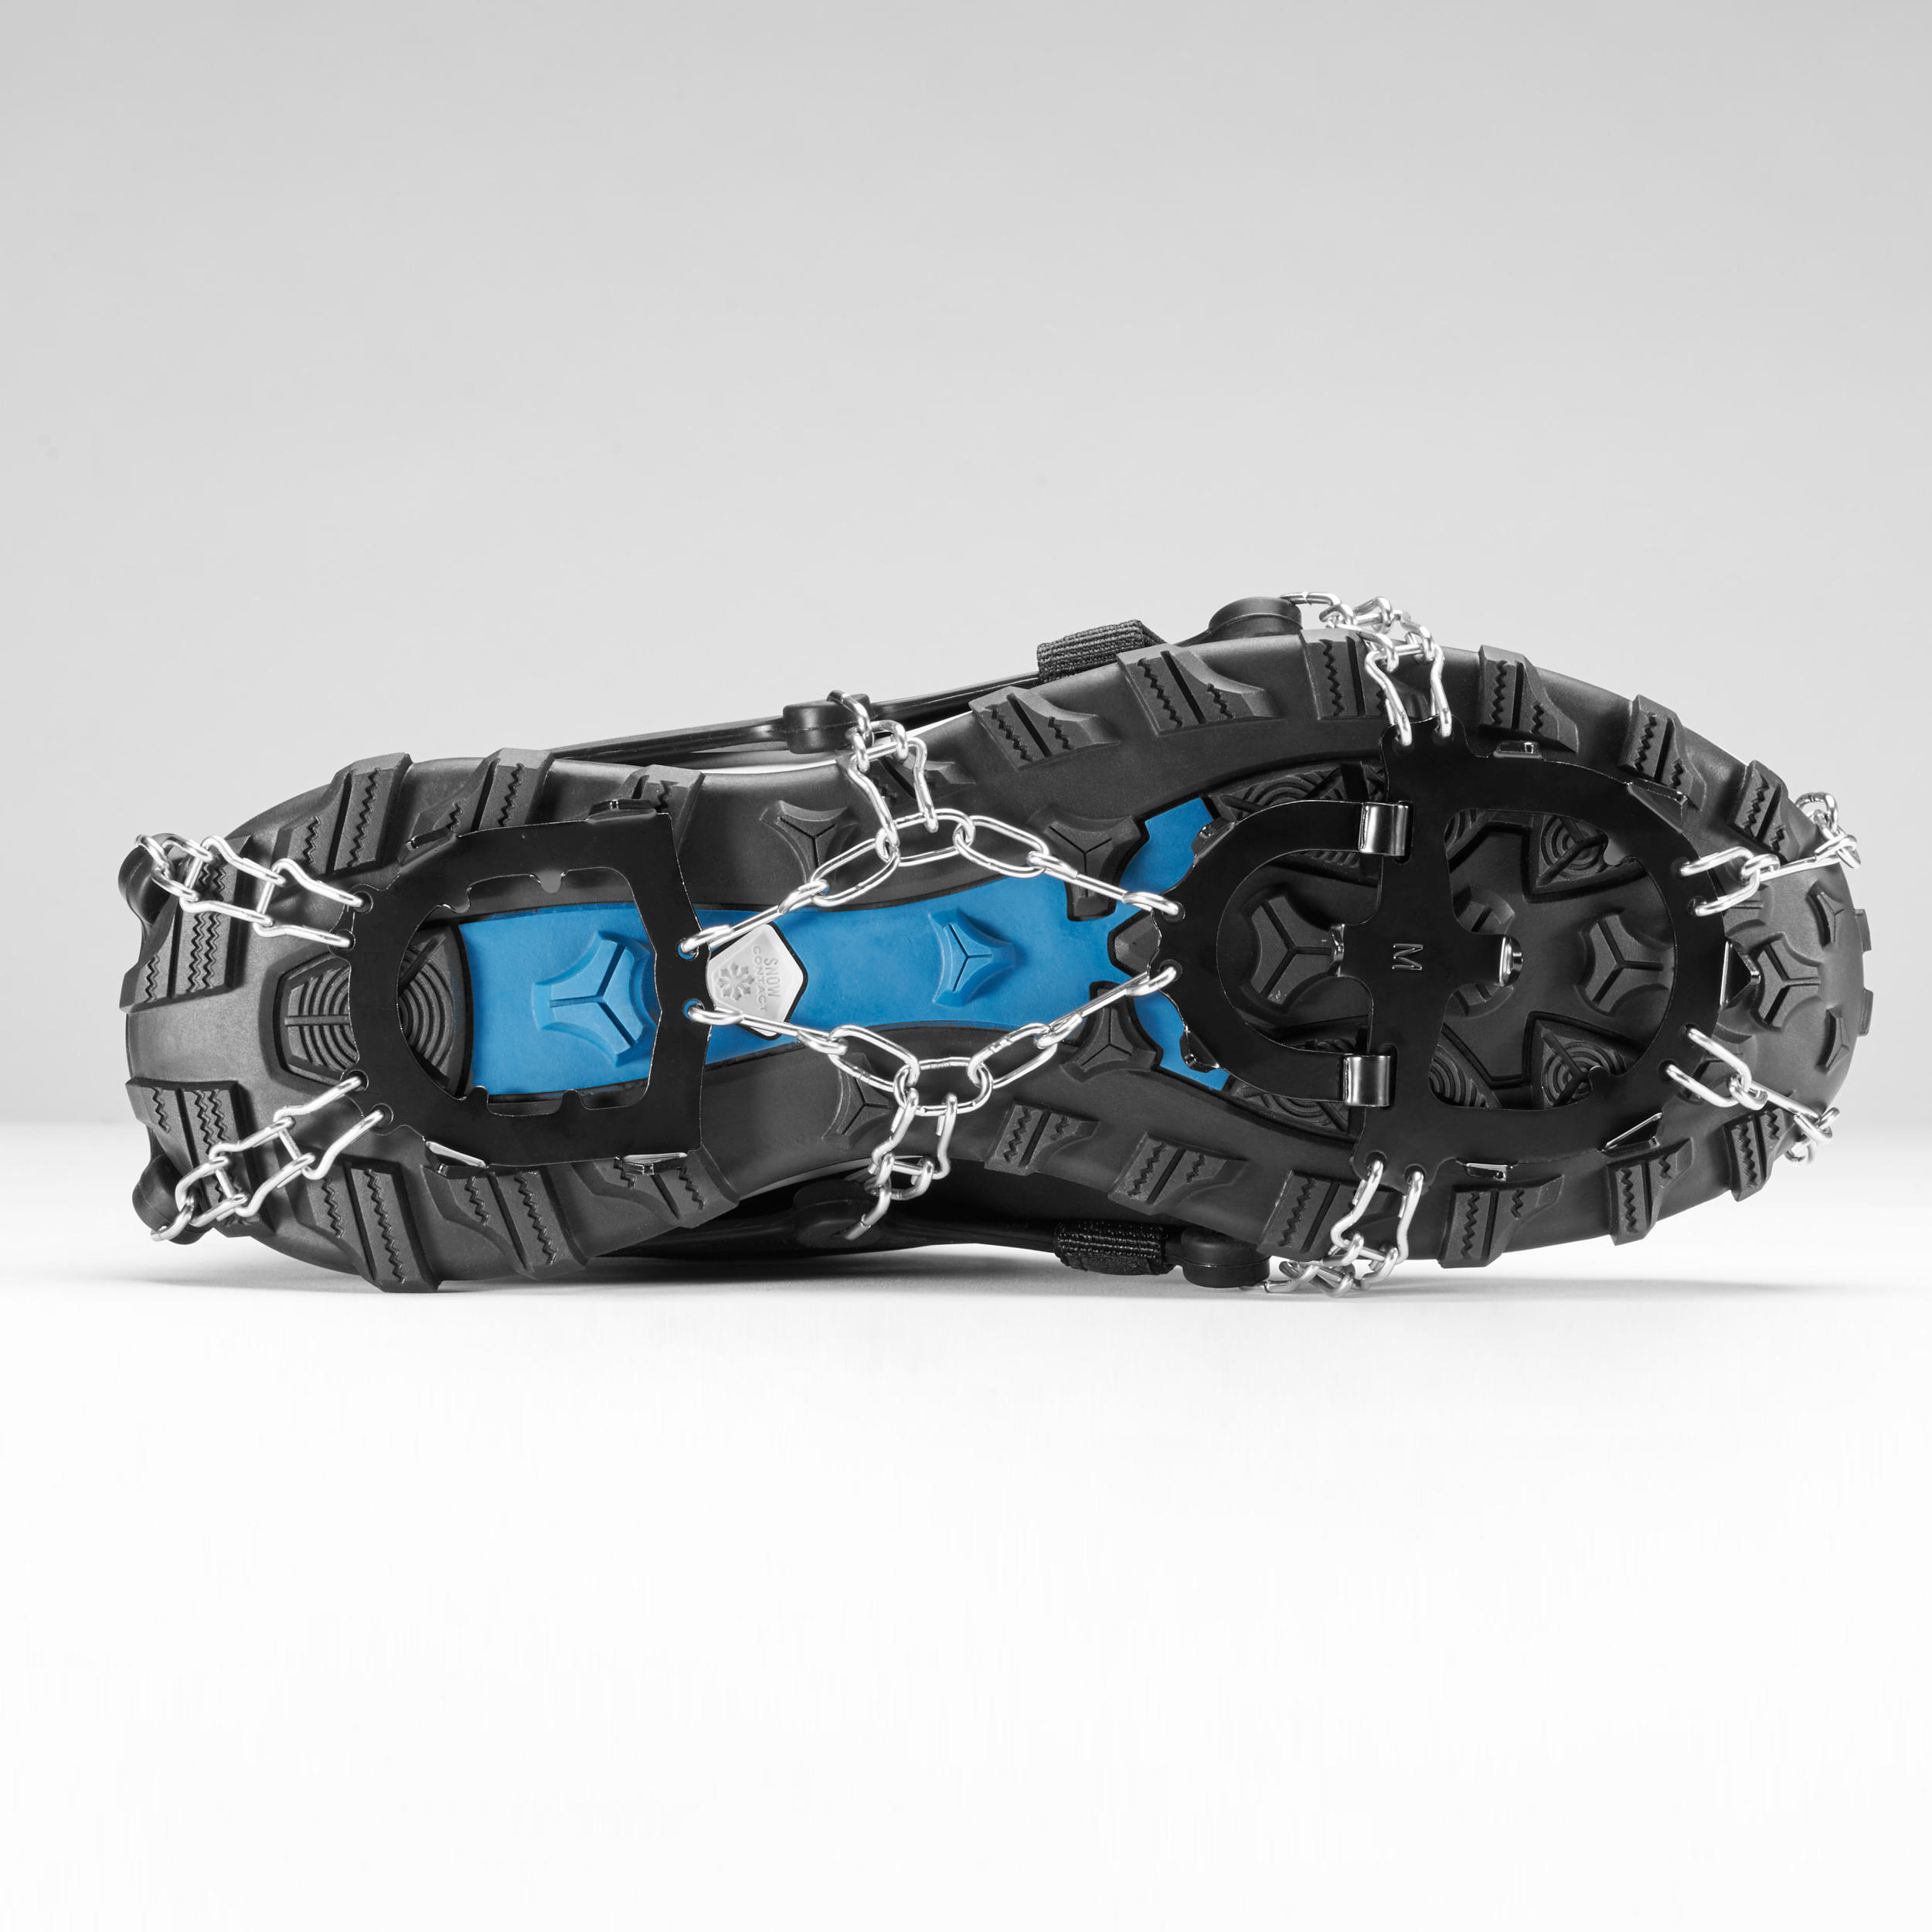 ADULT SNOW SHOES - SH900 - S TO XL 4/11